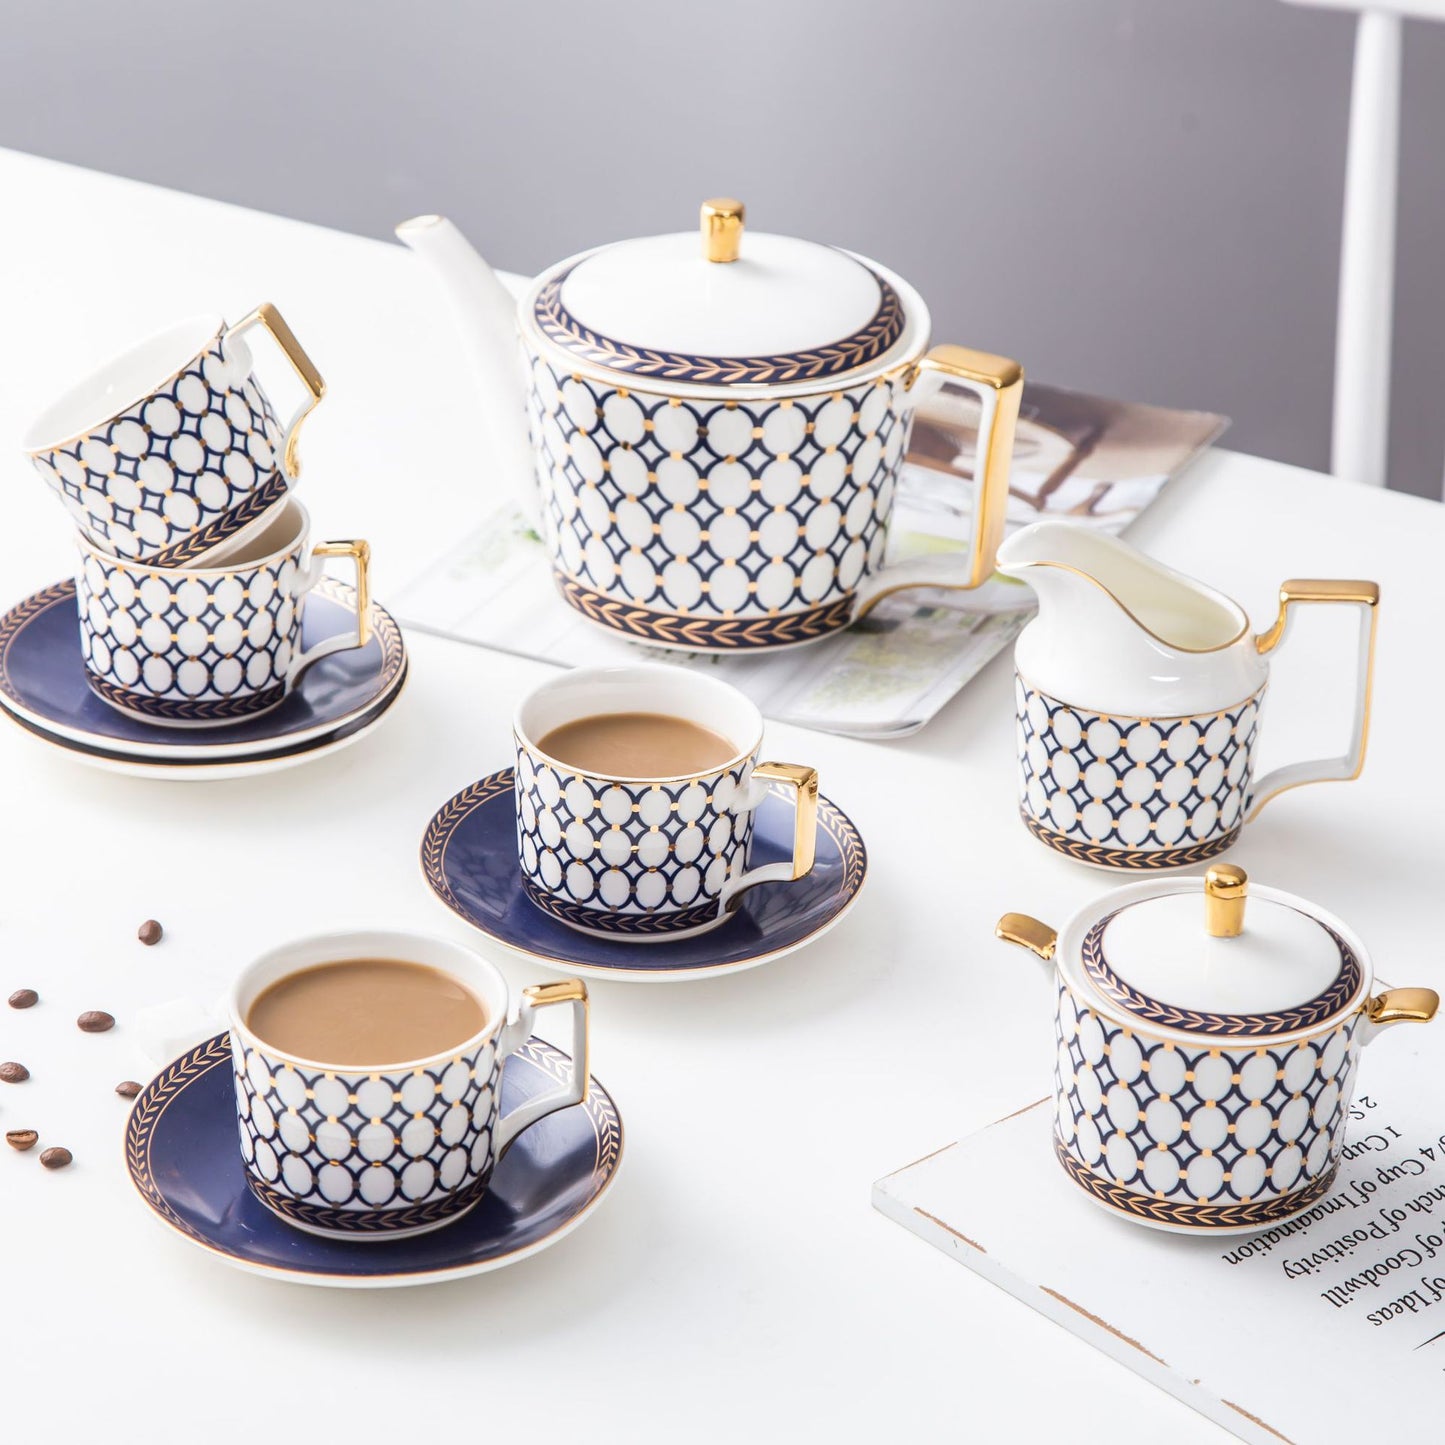 The Ocean Coffee Cup & Saucer Set